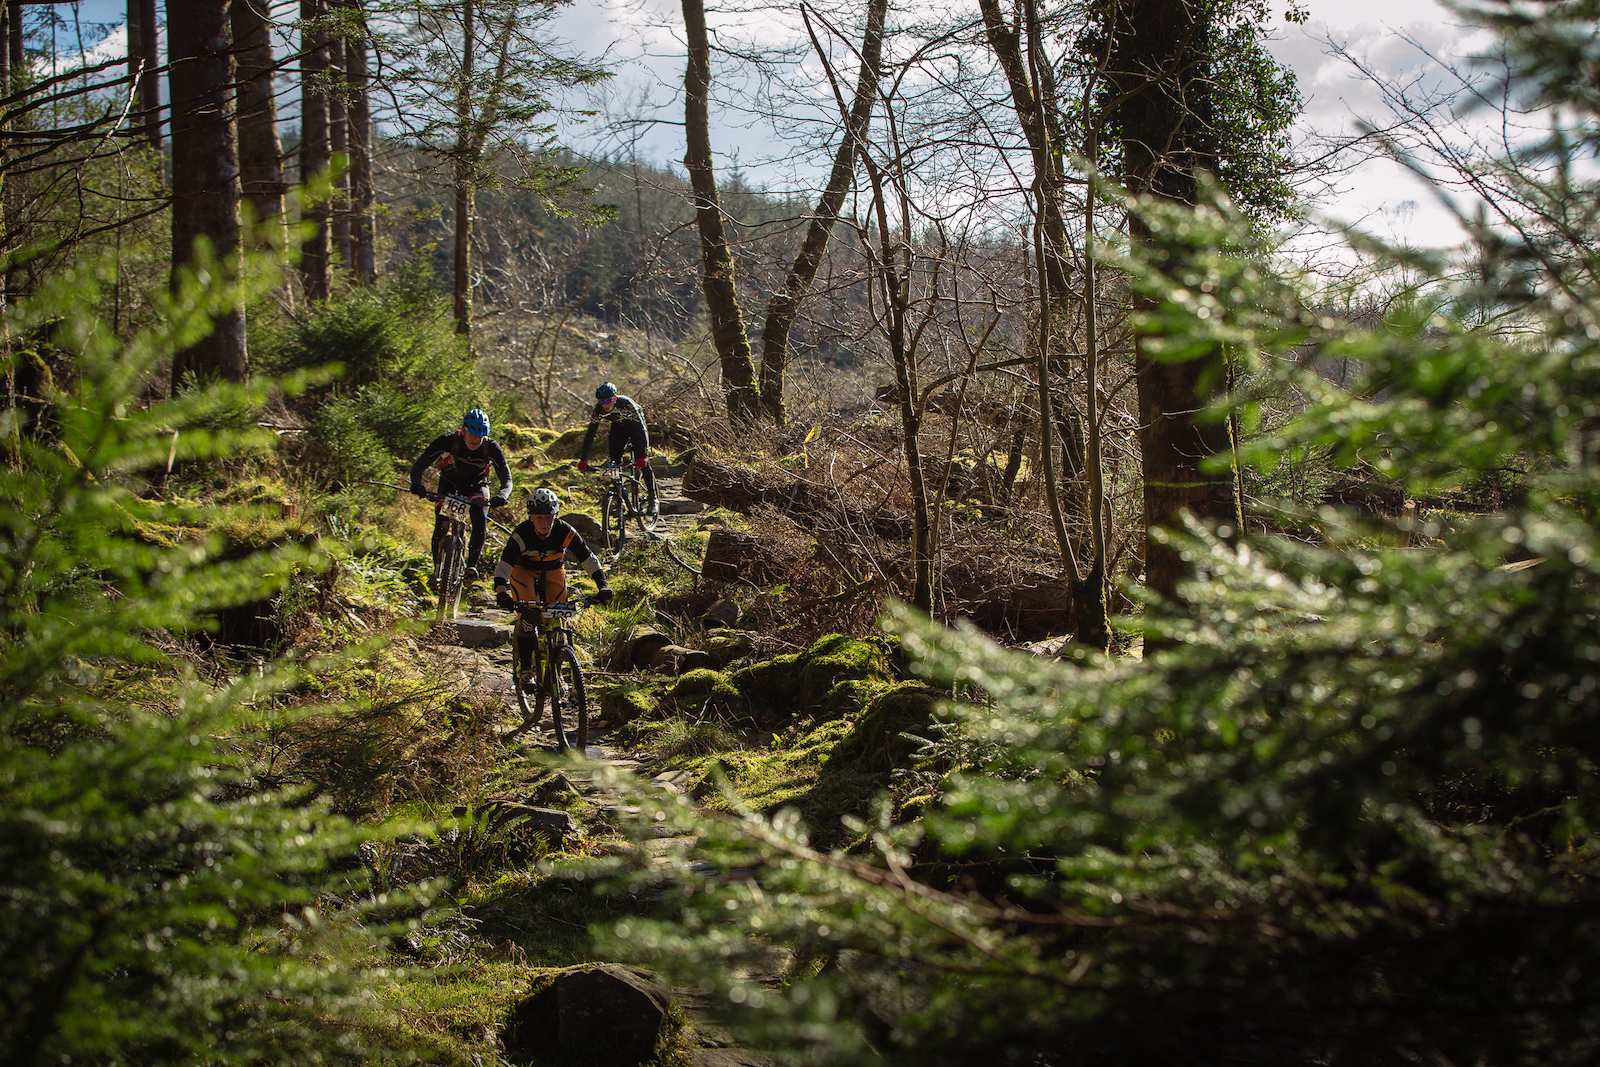 Beautiful forest, glorious weather, fantastic trails and riding with your mates.